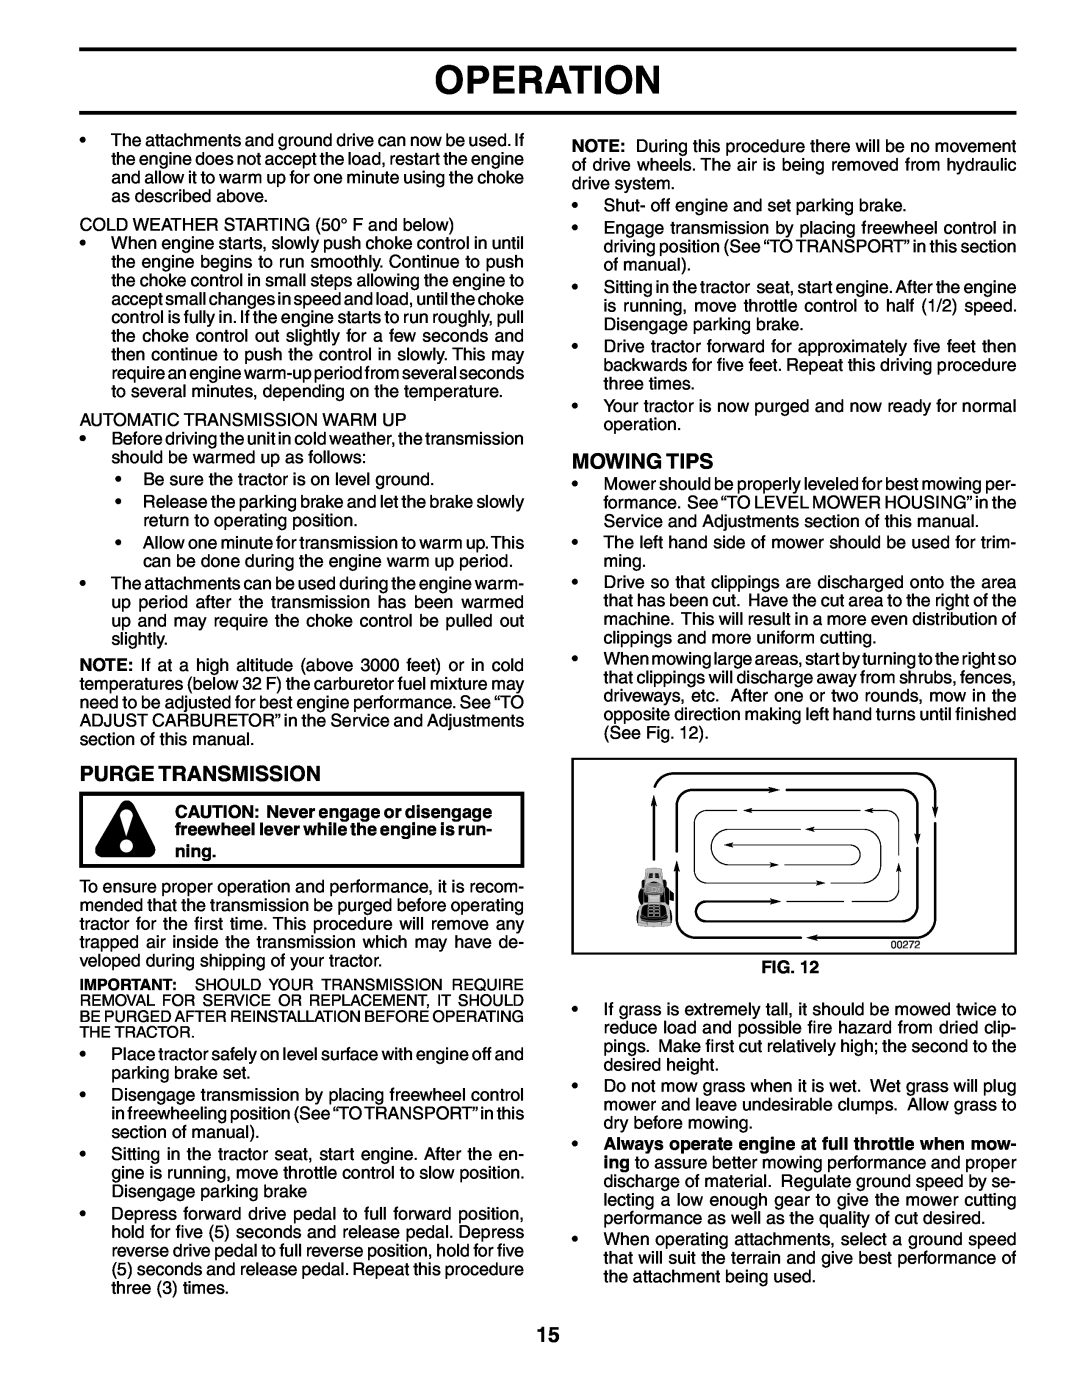 Poulan PD20PH48STB owner manual Purge Transmission, Mowing Tips, Operation, ning 